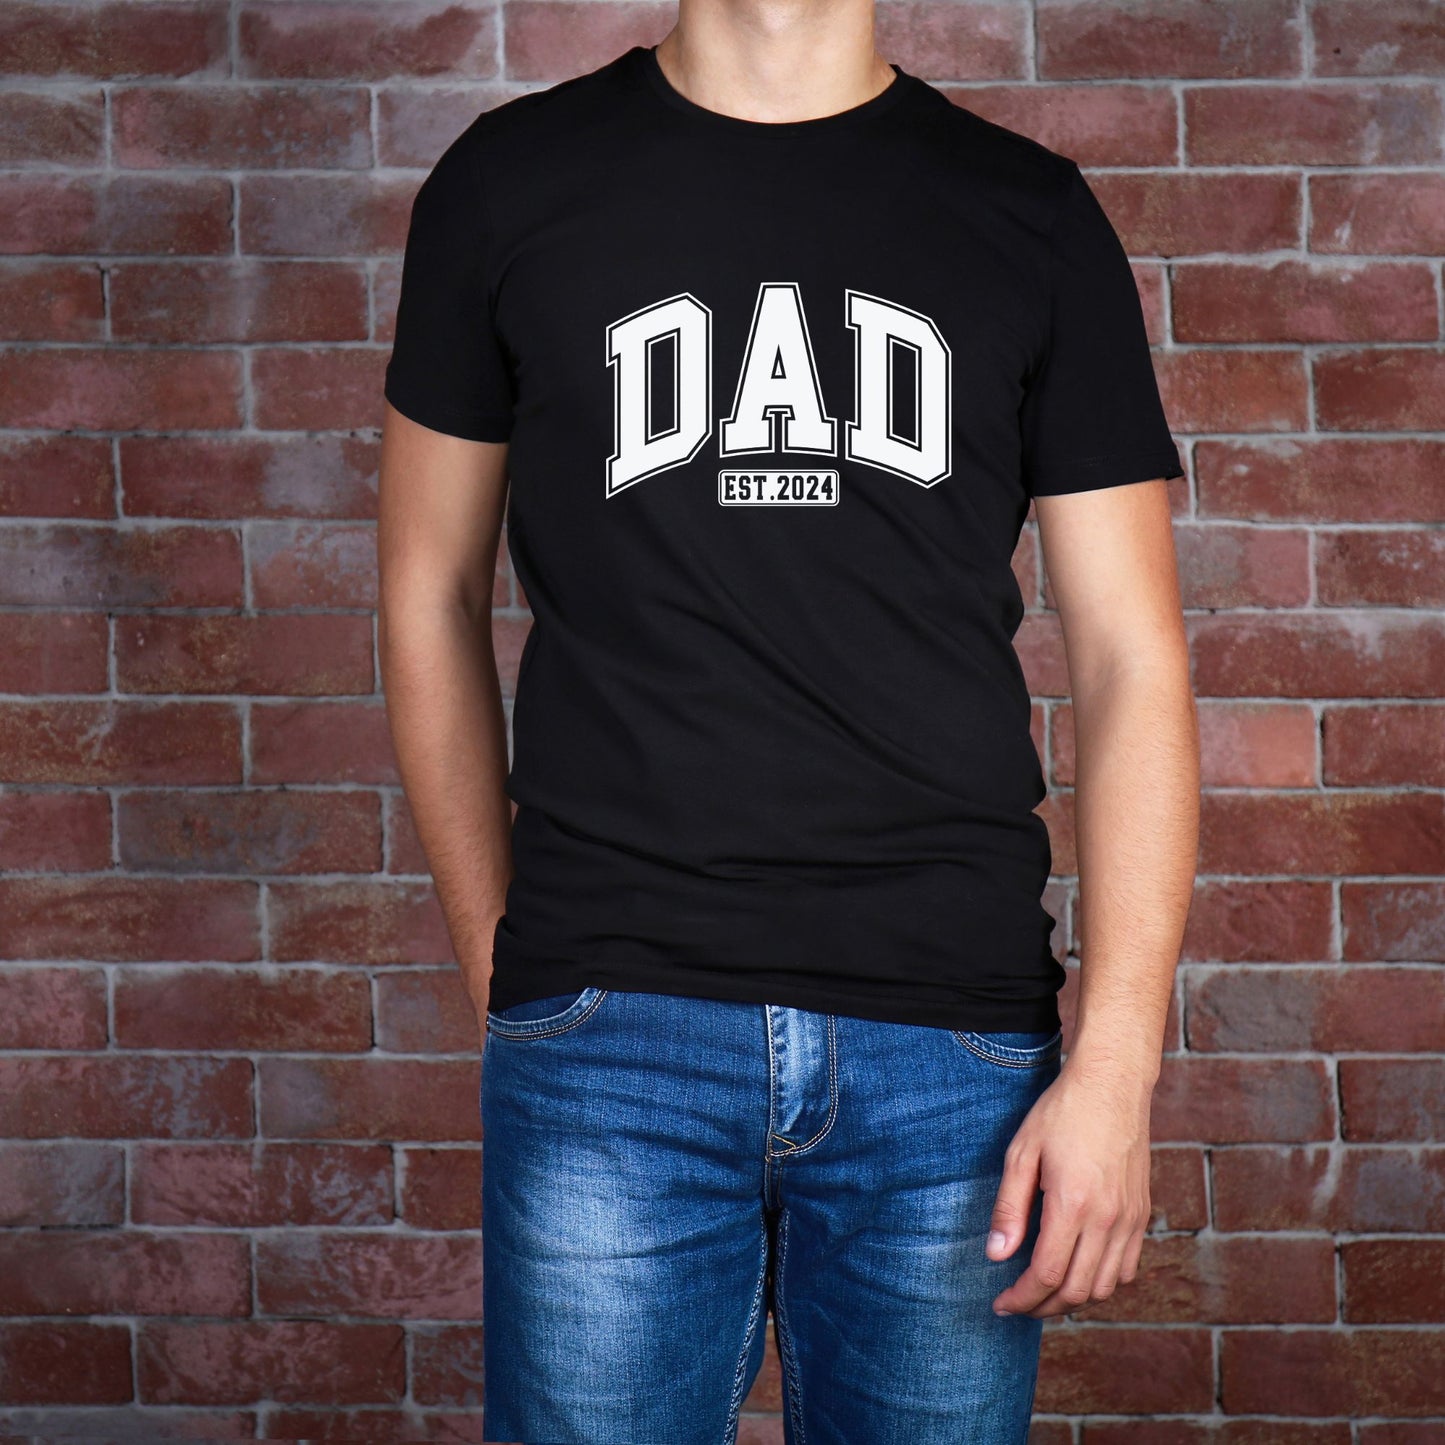 "Dad Est 2024" Short Sleeved T-Shirt for Father's Day Gift